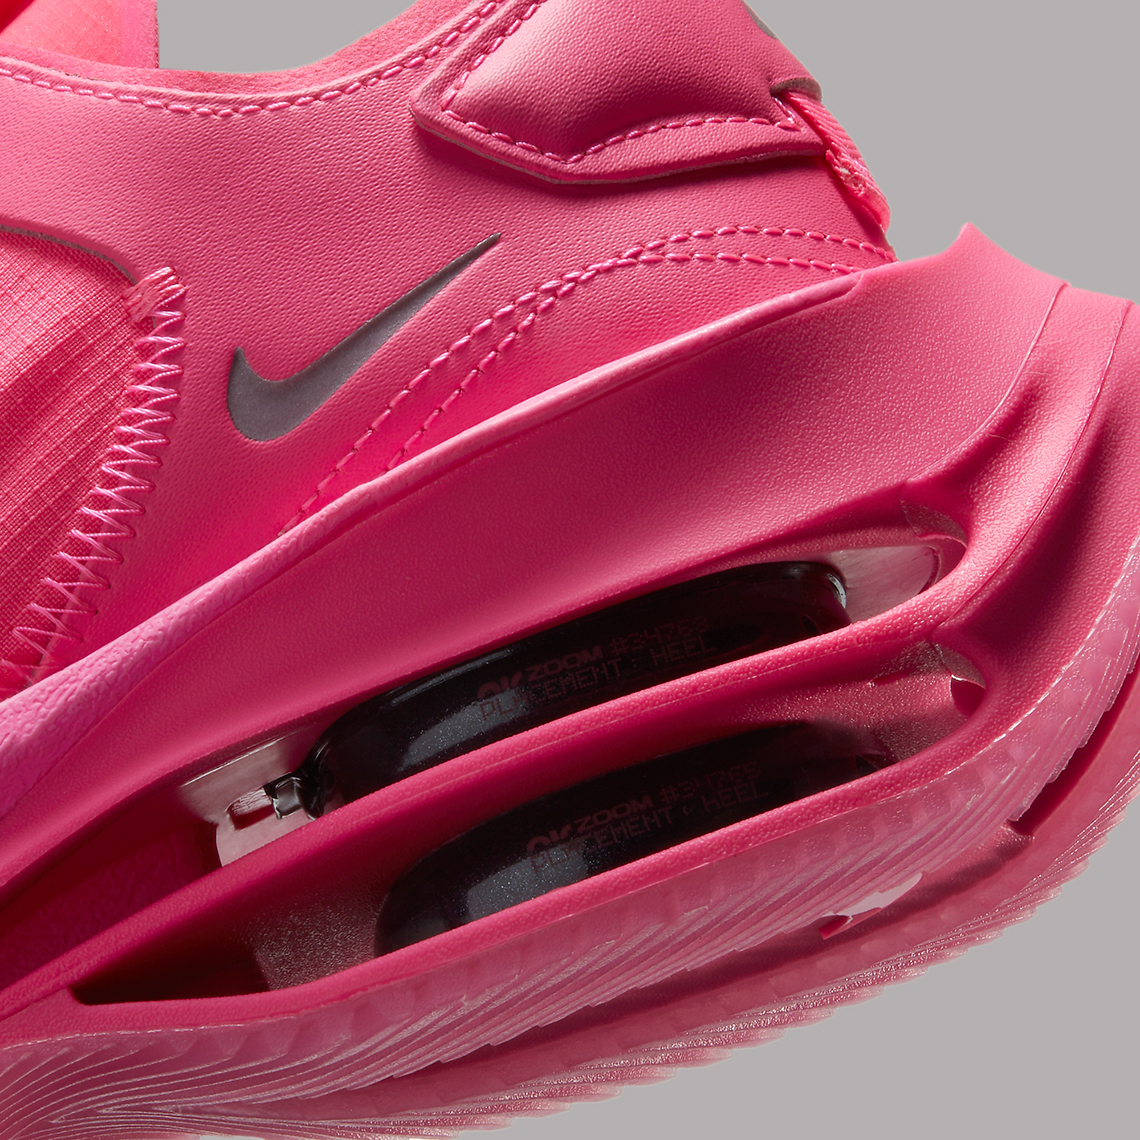 Nike Zoom Double Stacked Pink Cz2909 600 6